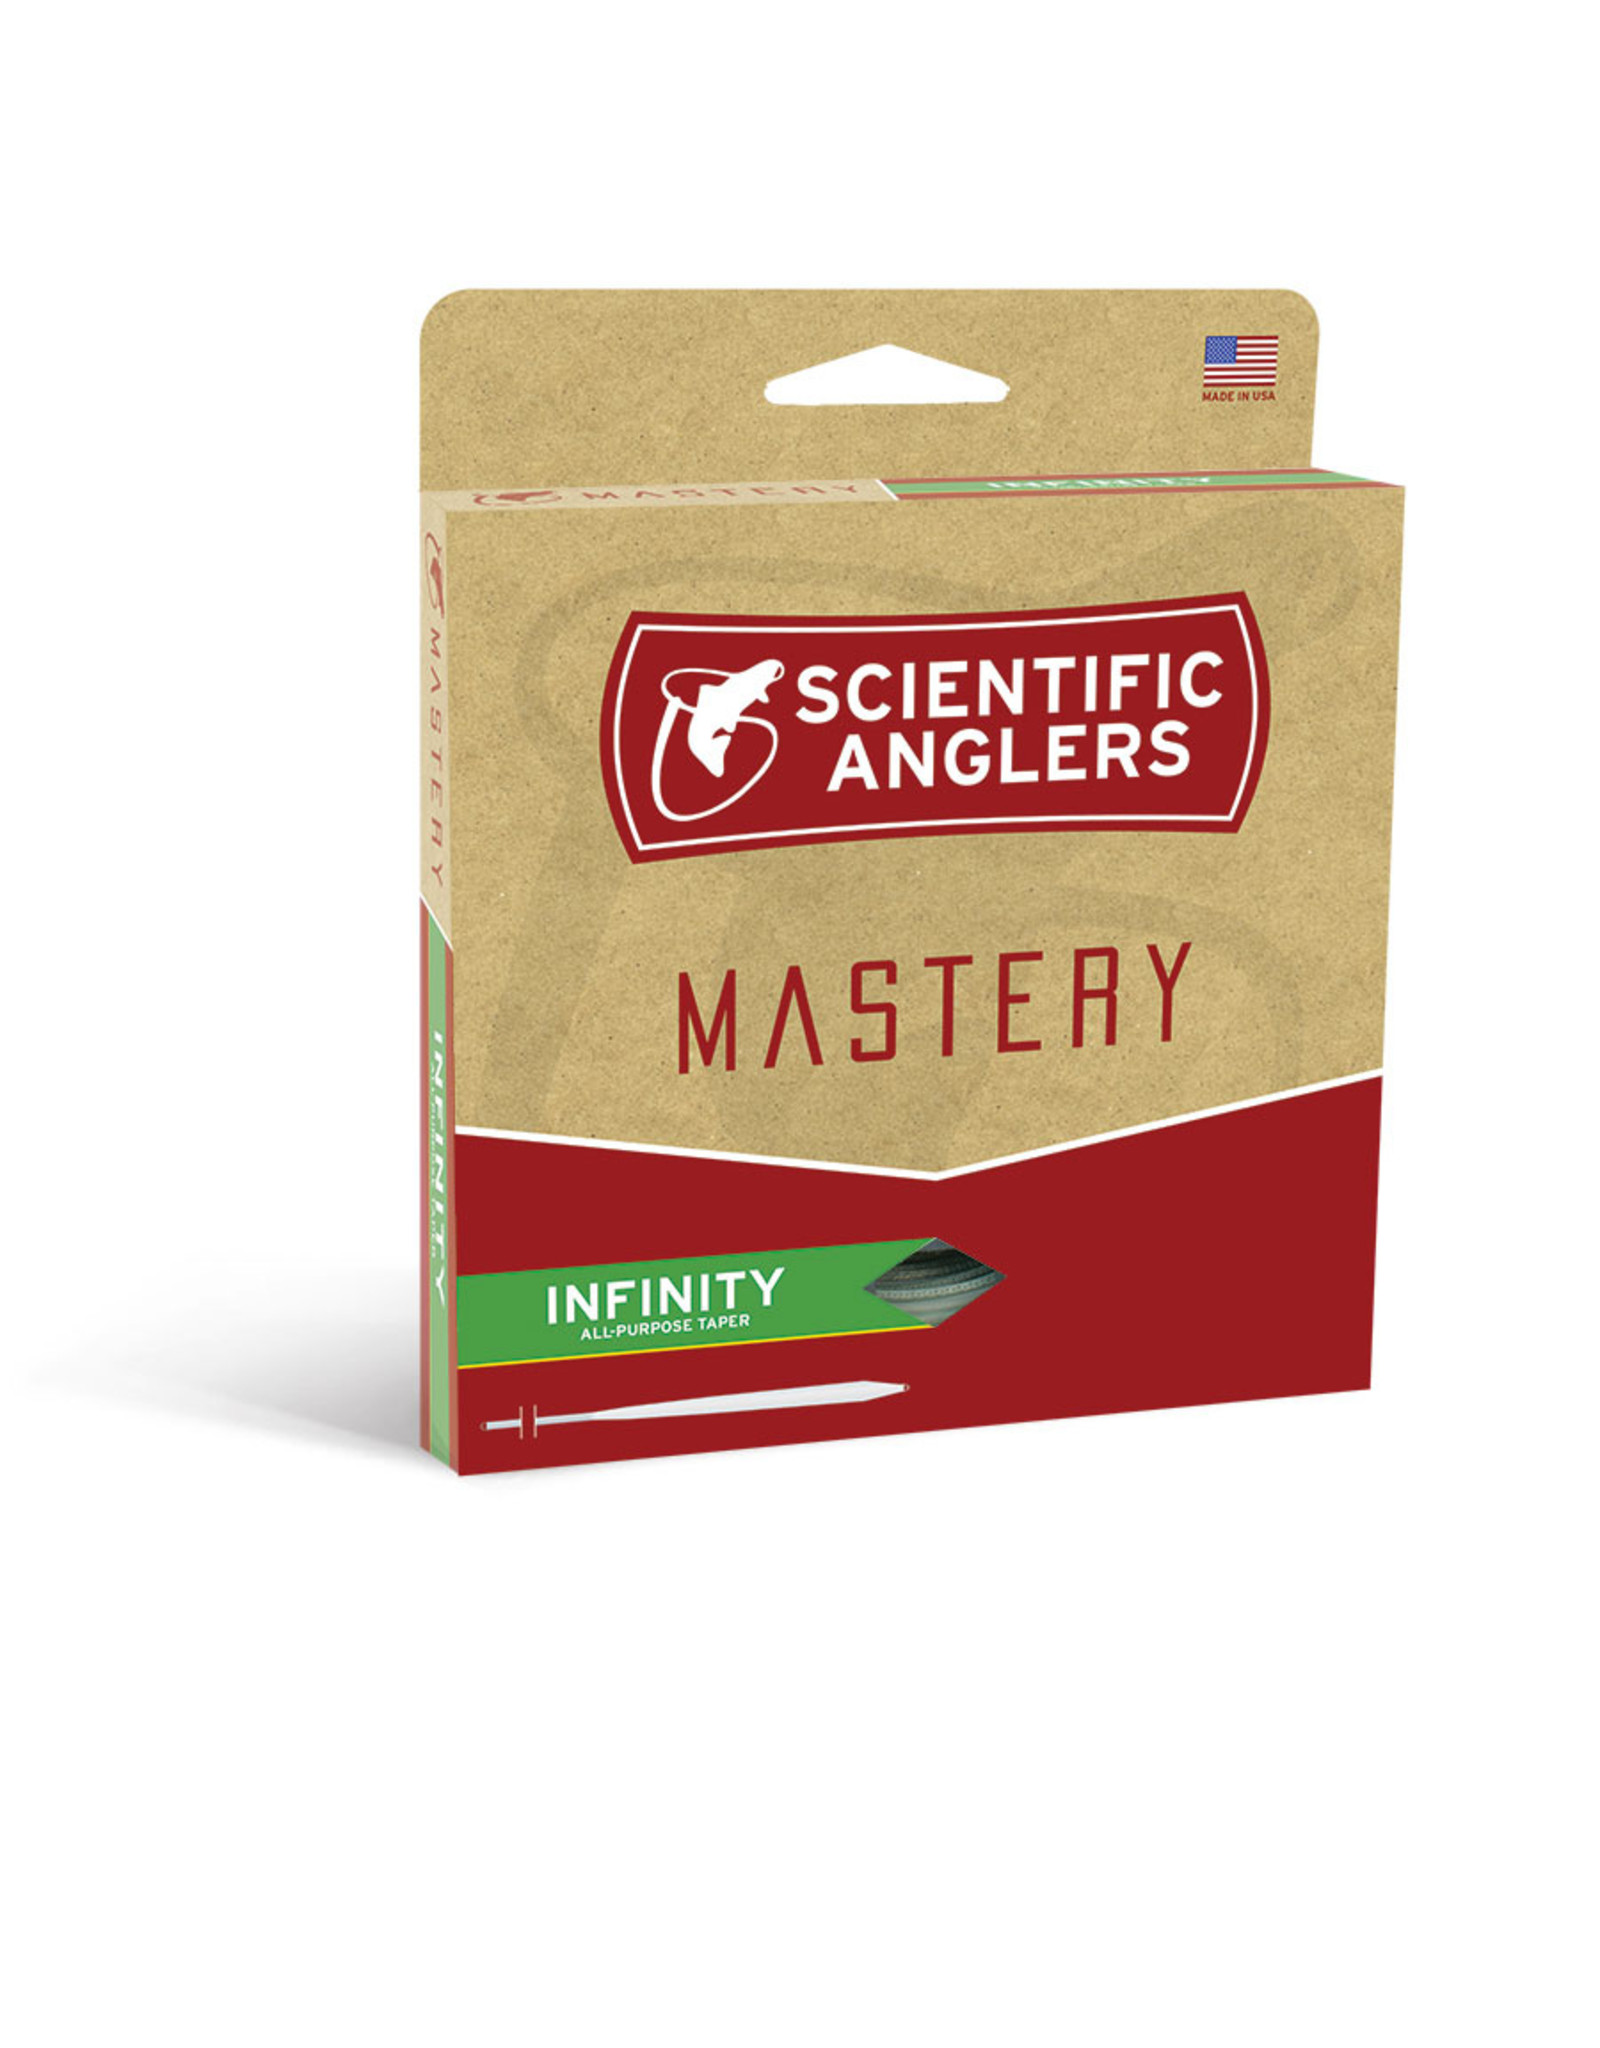 Scientific Anglers Scientific Anglers - Mastery Infinity Fly Line